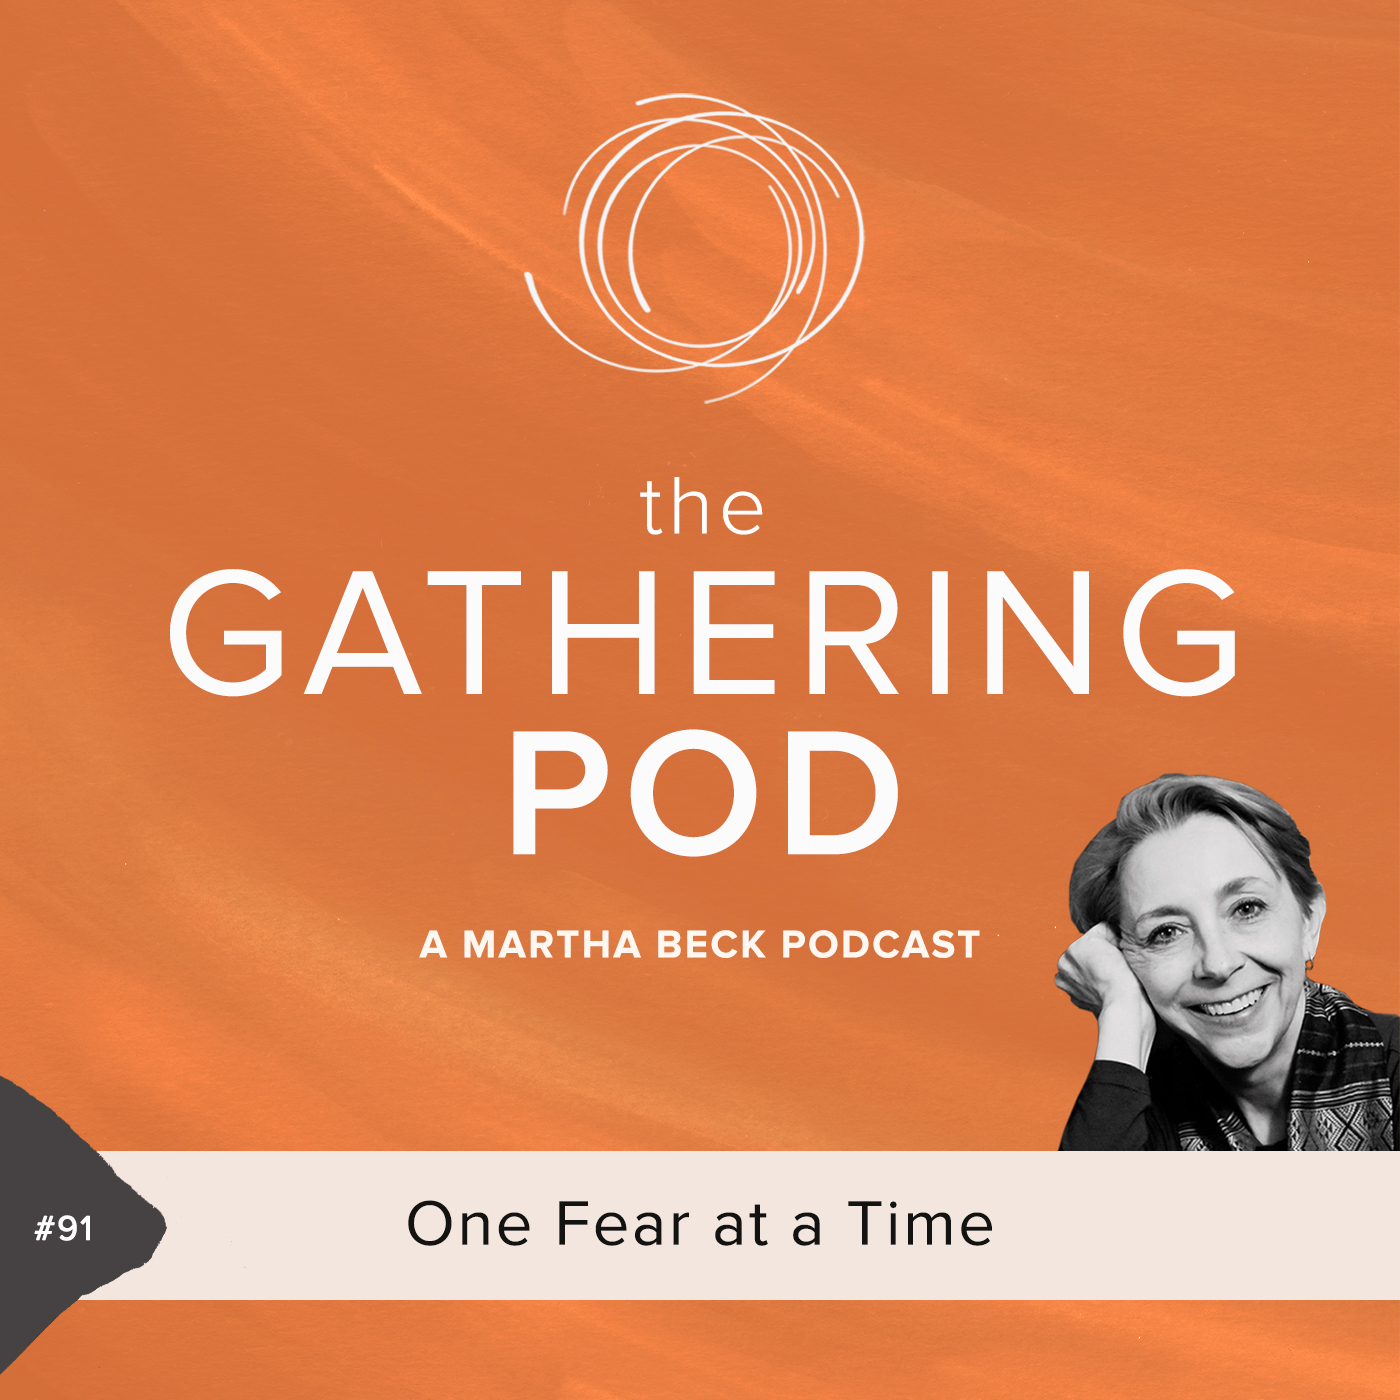 Image for The Gathering Pod A Martha Beck Podcast Episode #91 One Fear at a Time